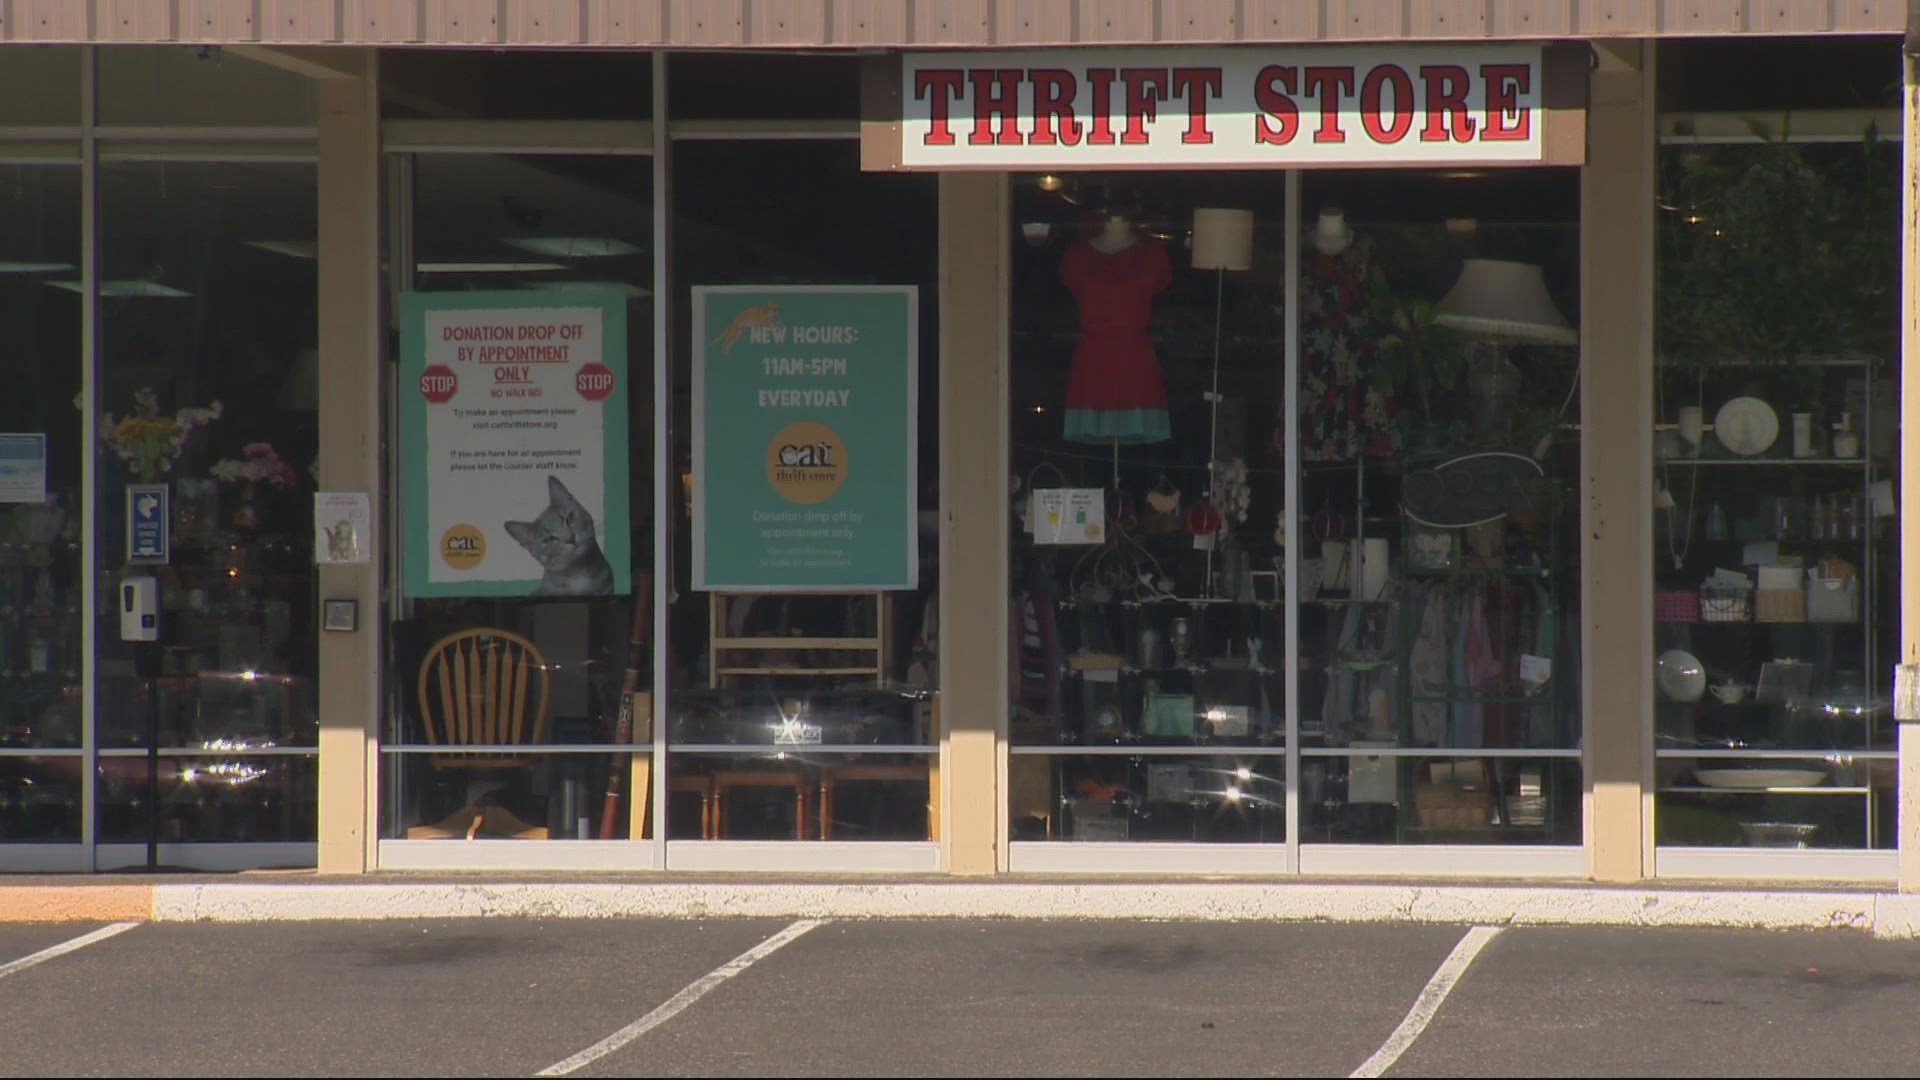 Donations at thrift stores are way up during the pandemic. Brittany Falkers explains how to make sure your items end up on store shelves and not in a landfill.